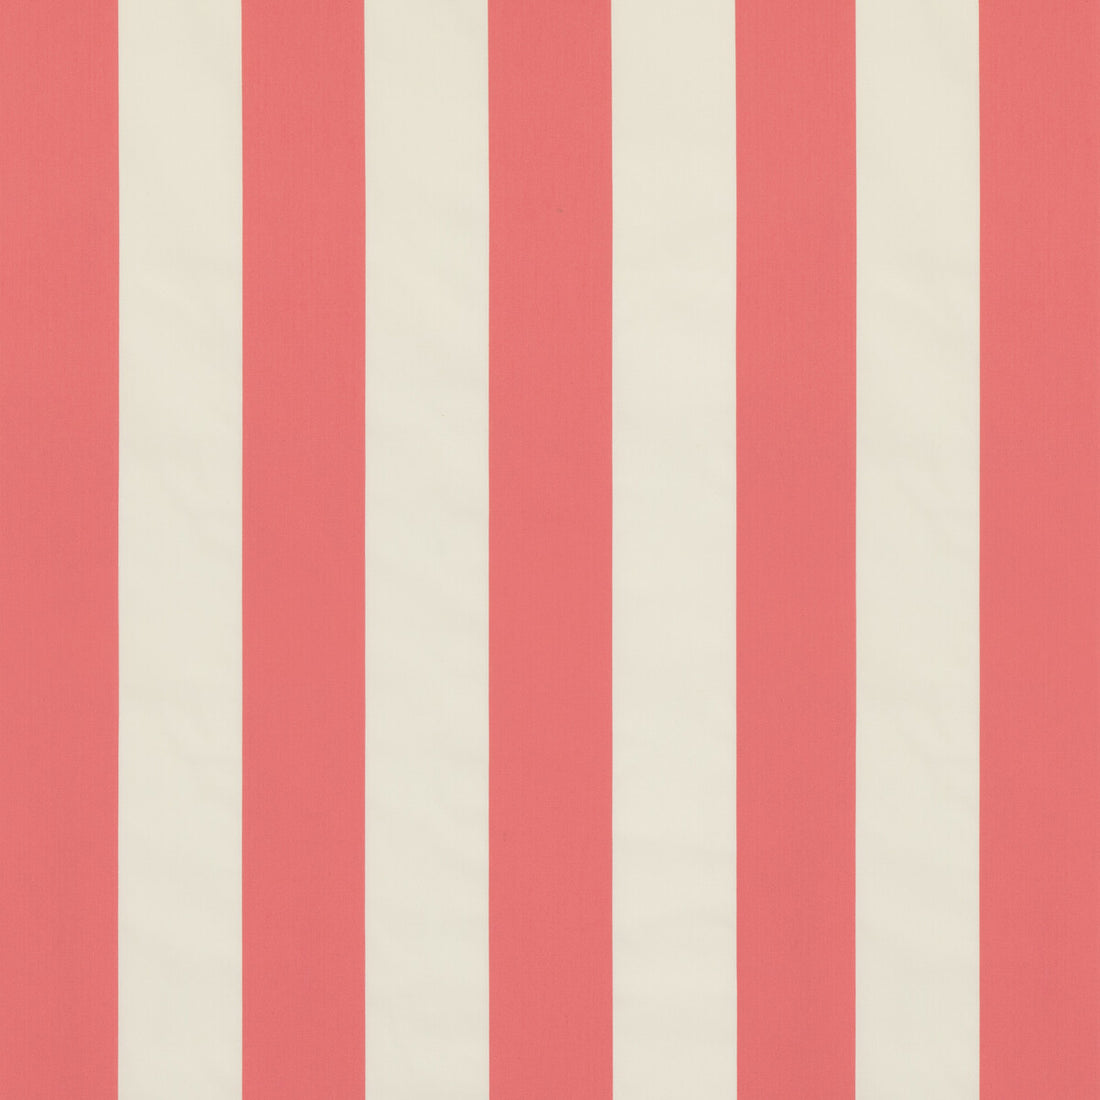 Robec Stripe fabric in rose color - pattern 8019104.7.0 - by Brunschwig &amp; Fils in the Normant Checks And Stripes collection